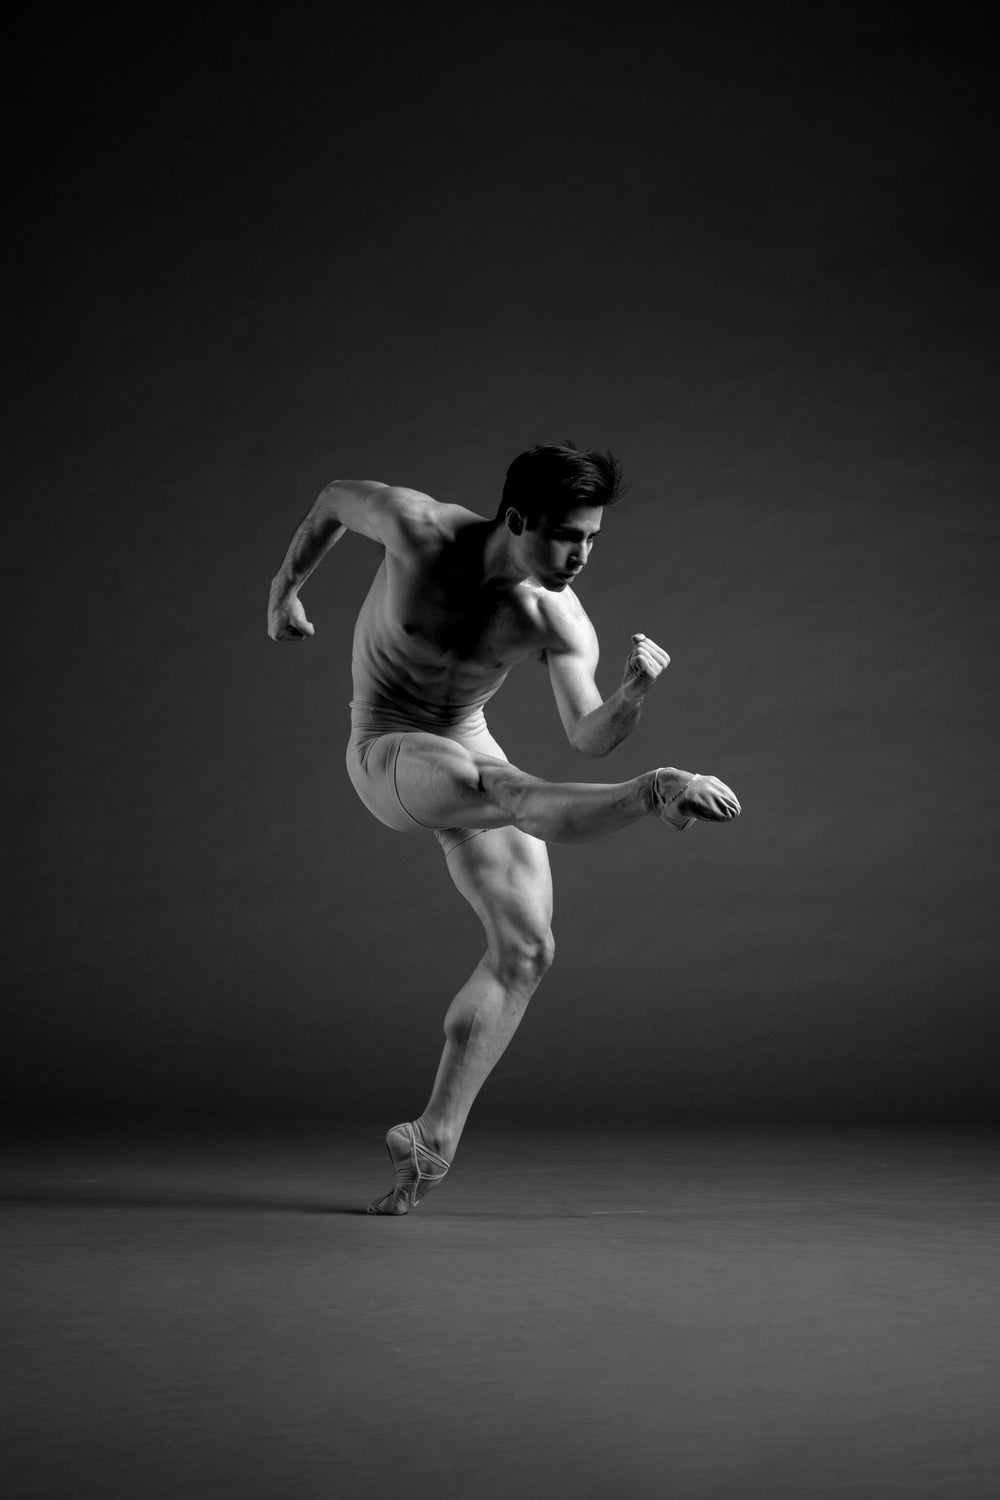 Art Dance Photography Prints - Purchase Online the artwork: Dancer solo in black and white photo by Francsico Estevez